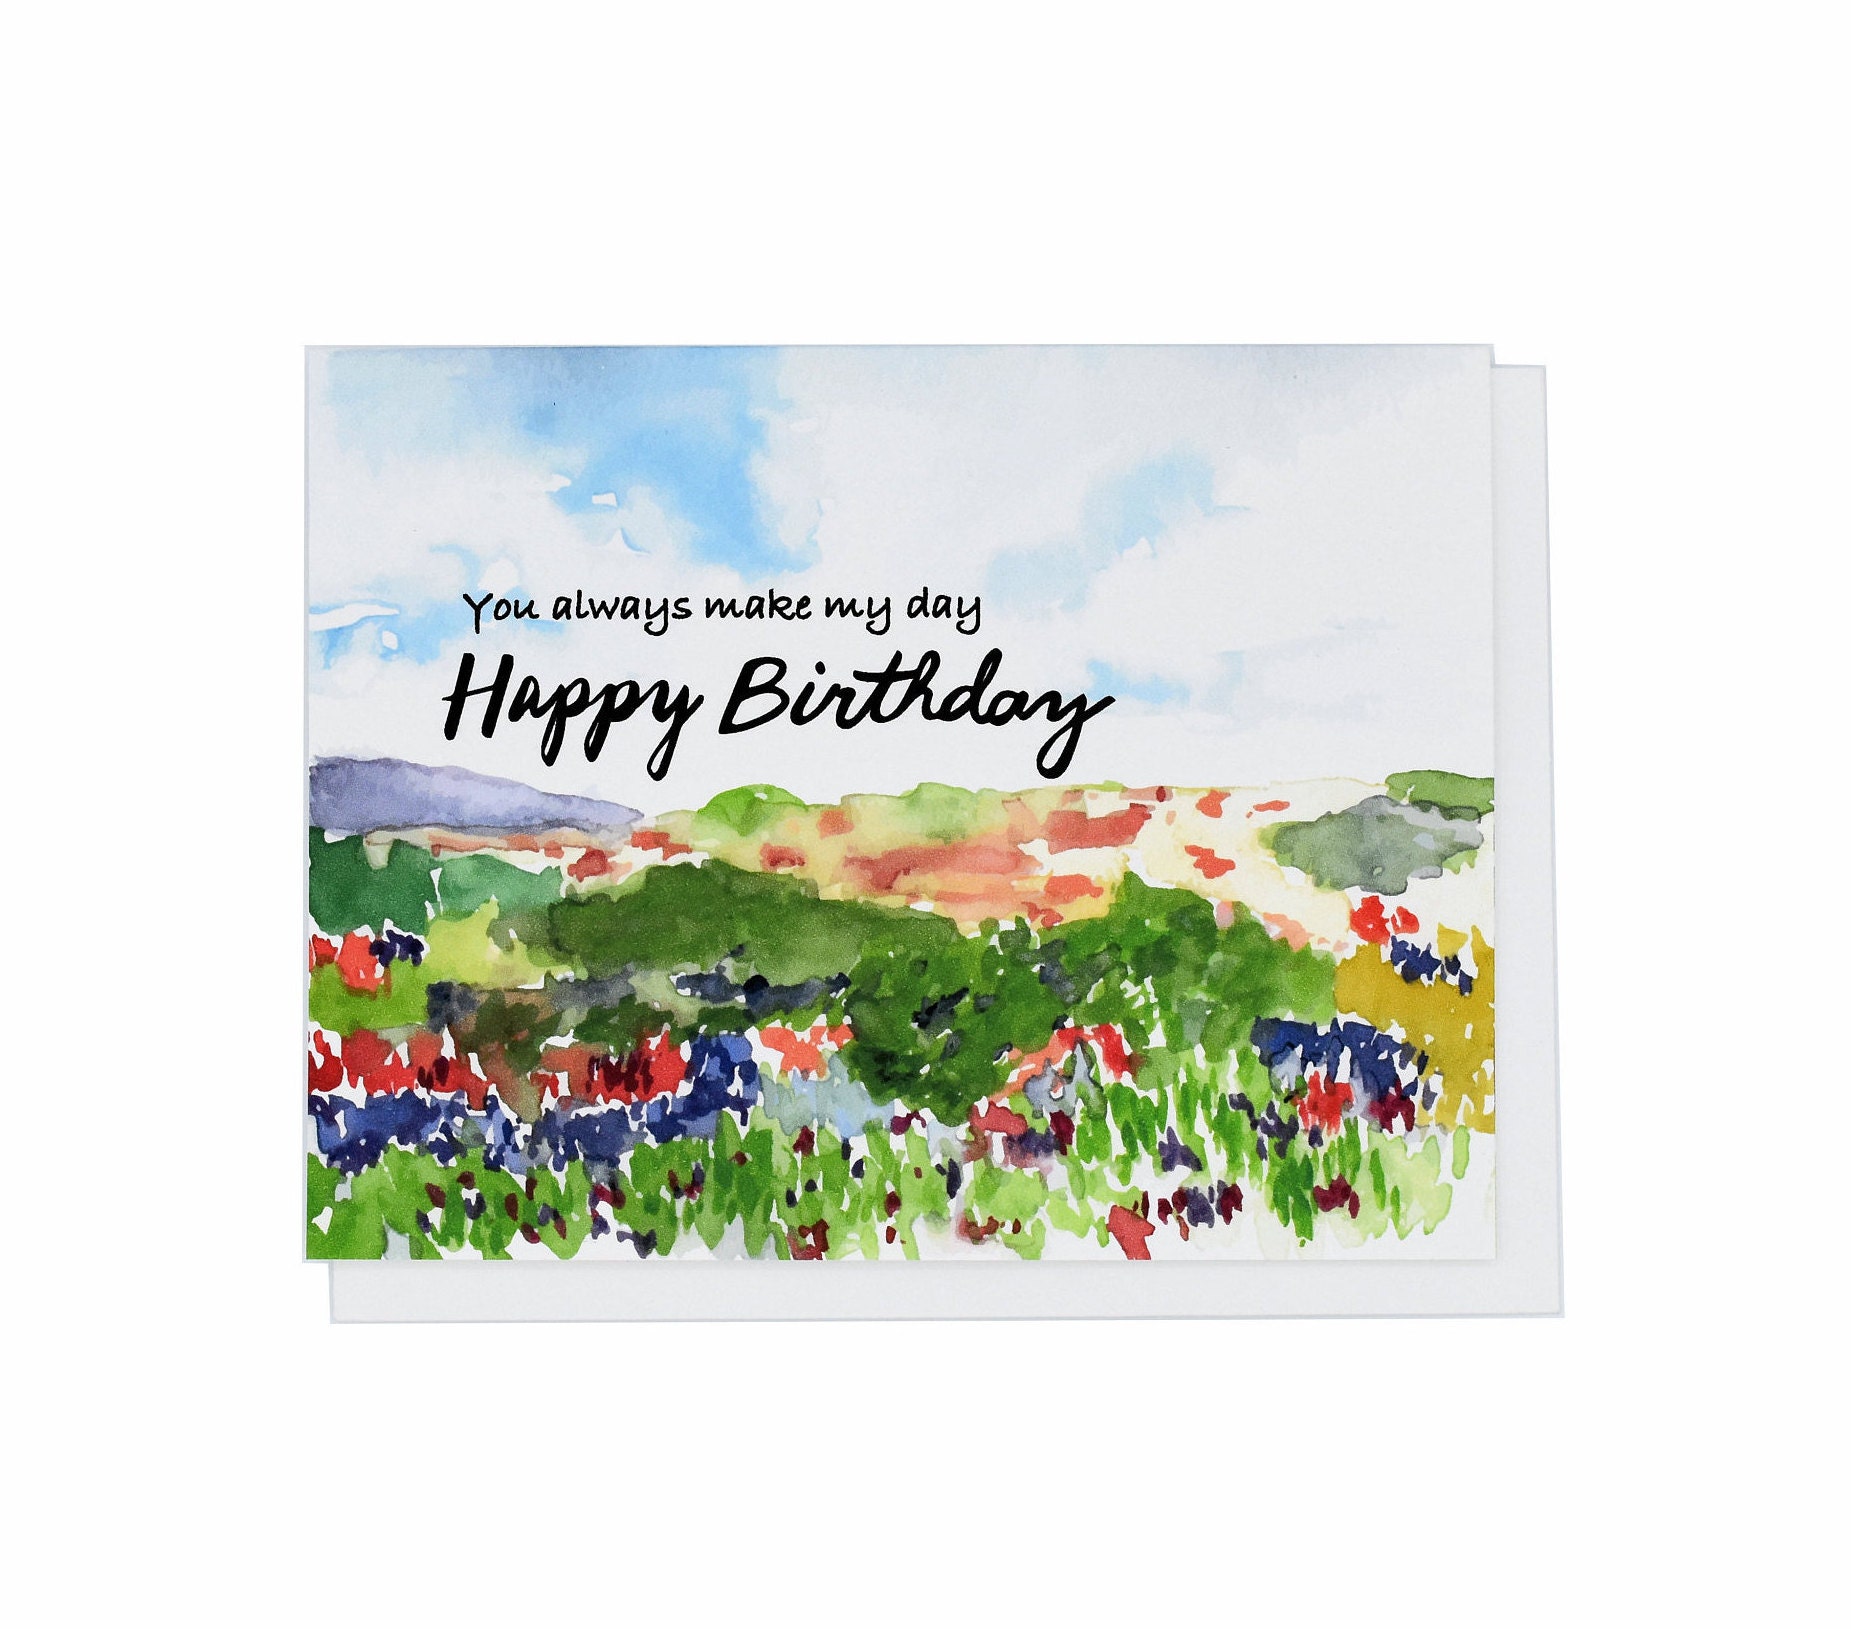 Happy Birthday Greetings with beautiful scenes 